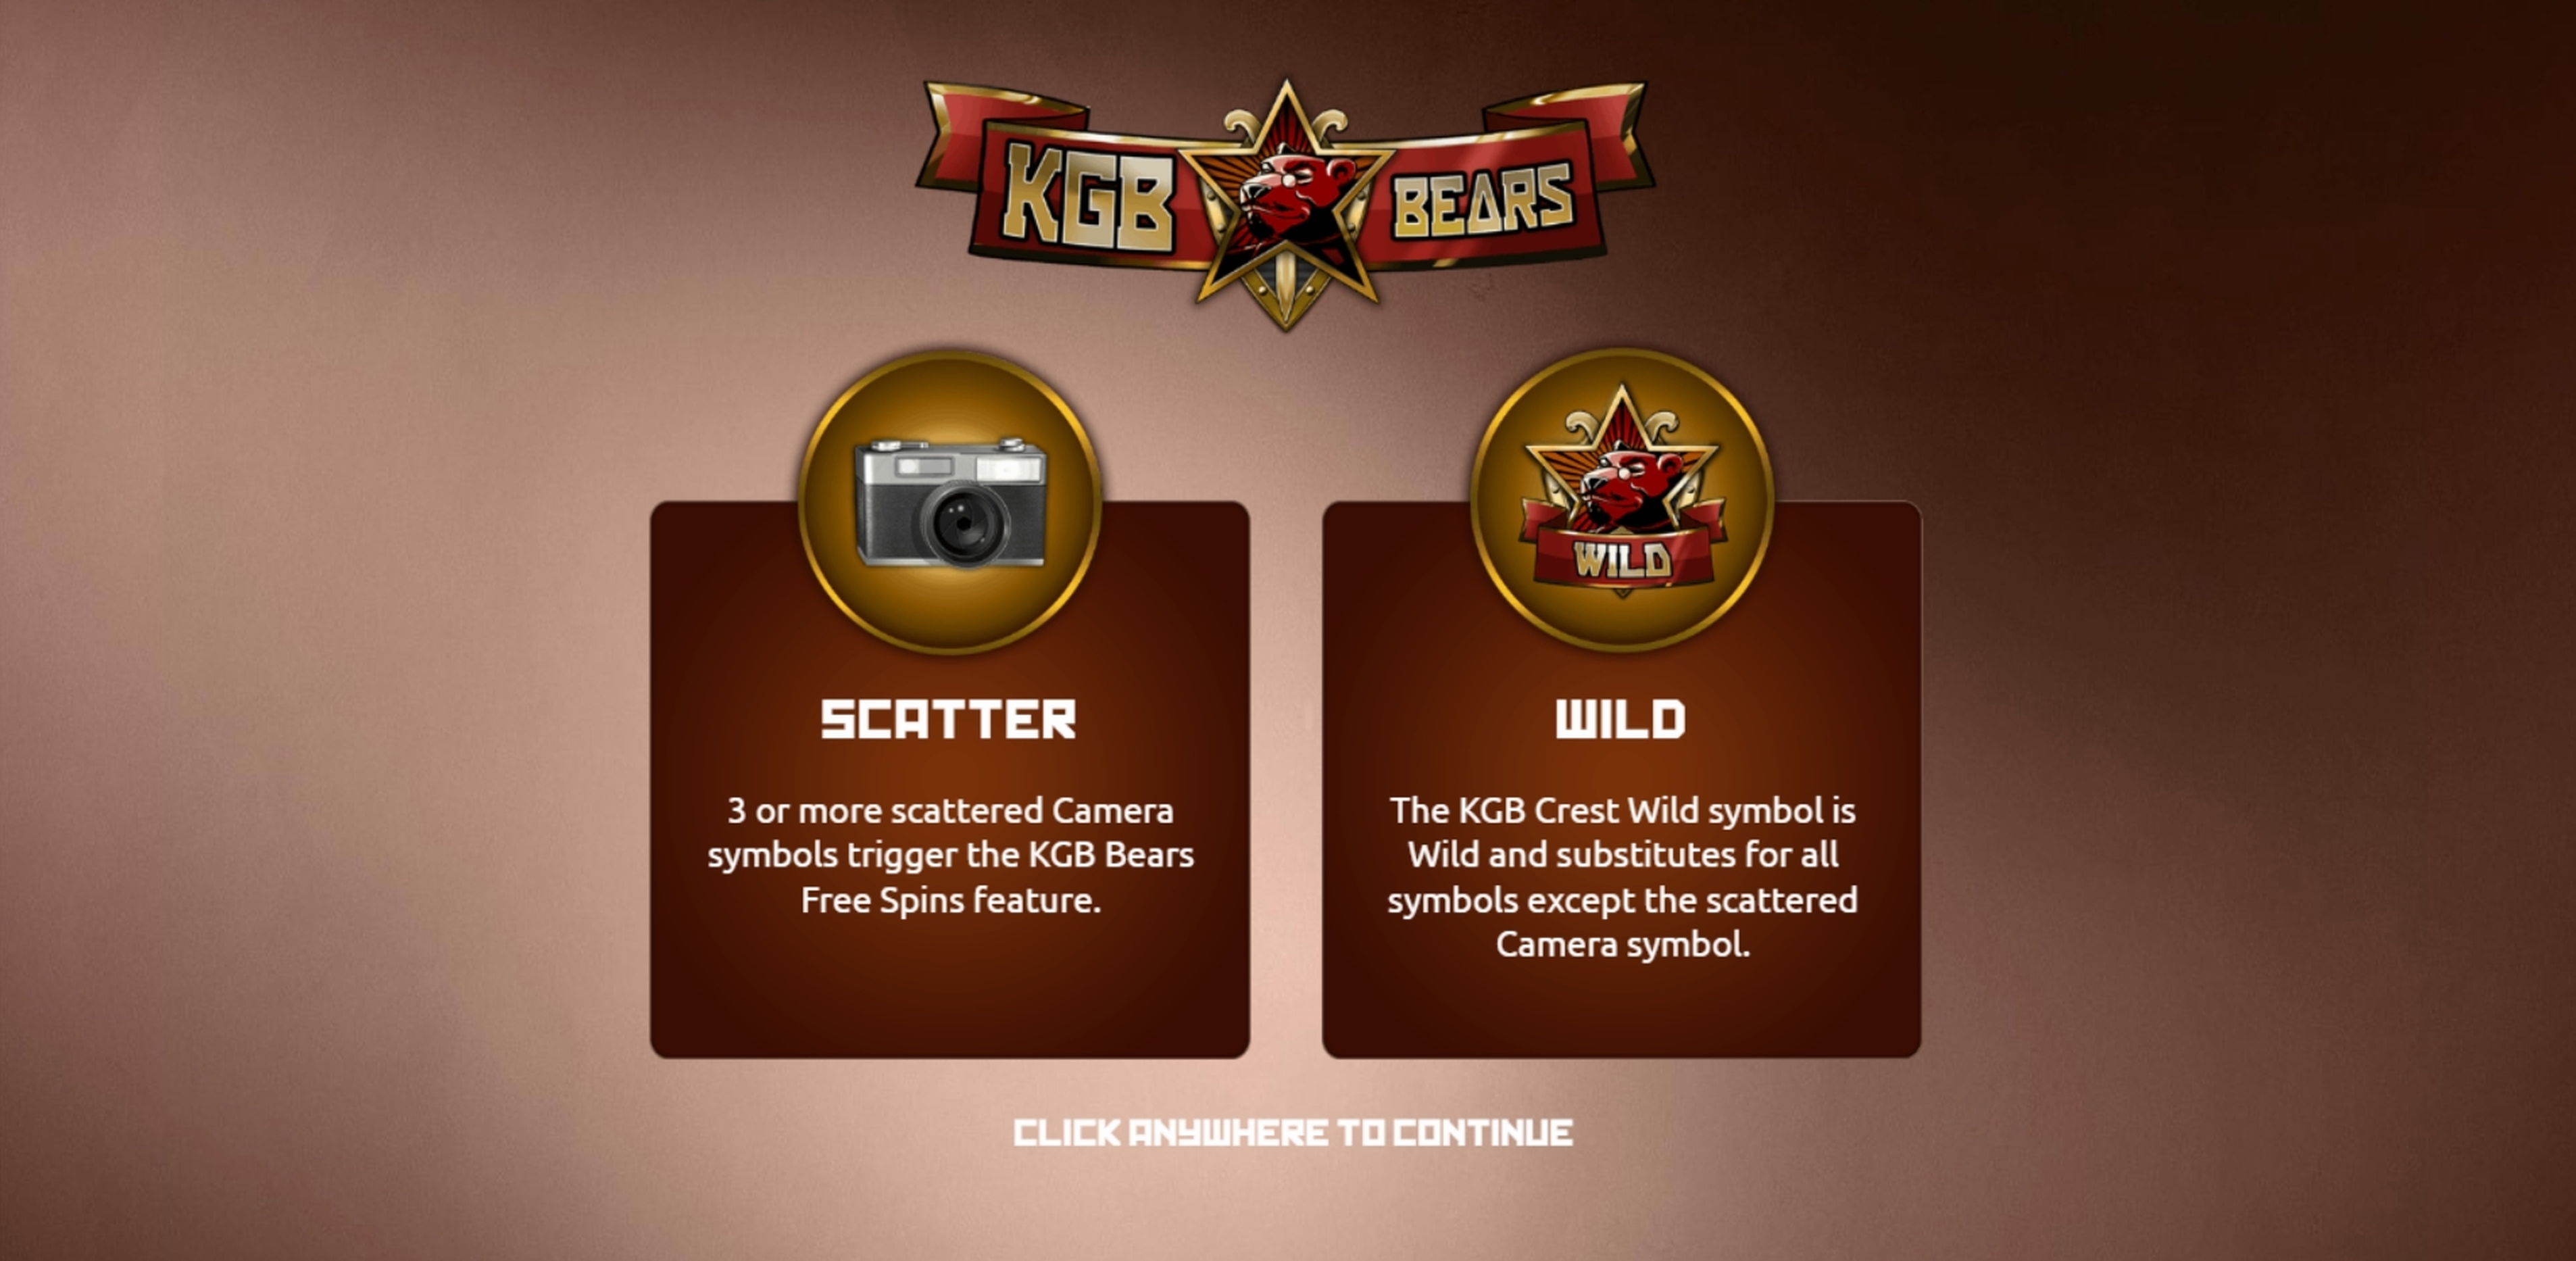 Play KGB Bears Free Casino Slot Game by The Games Company